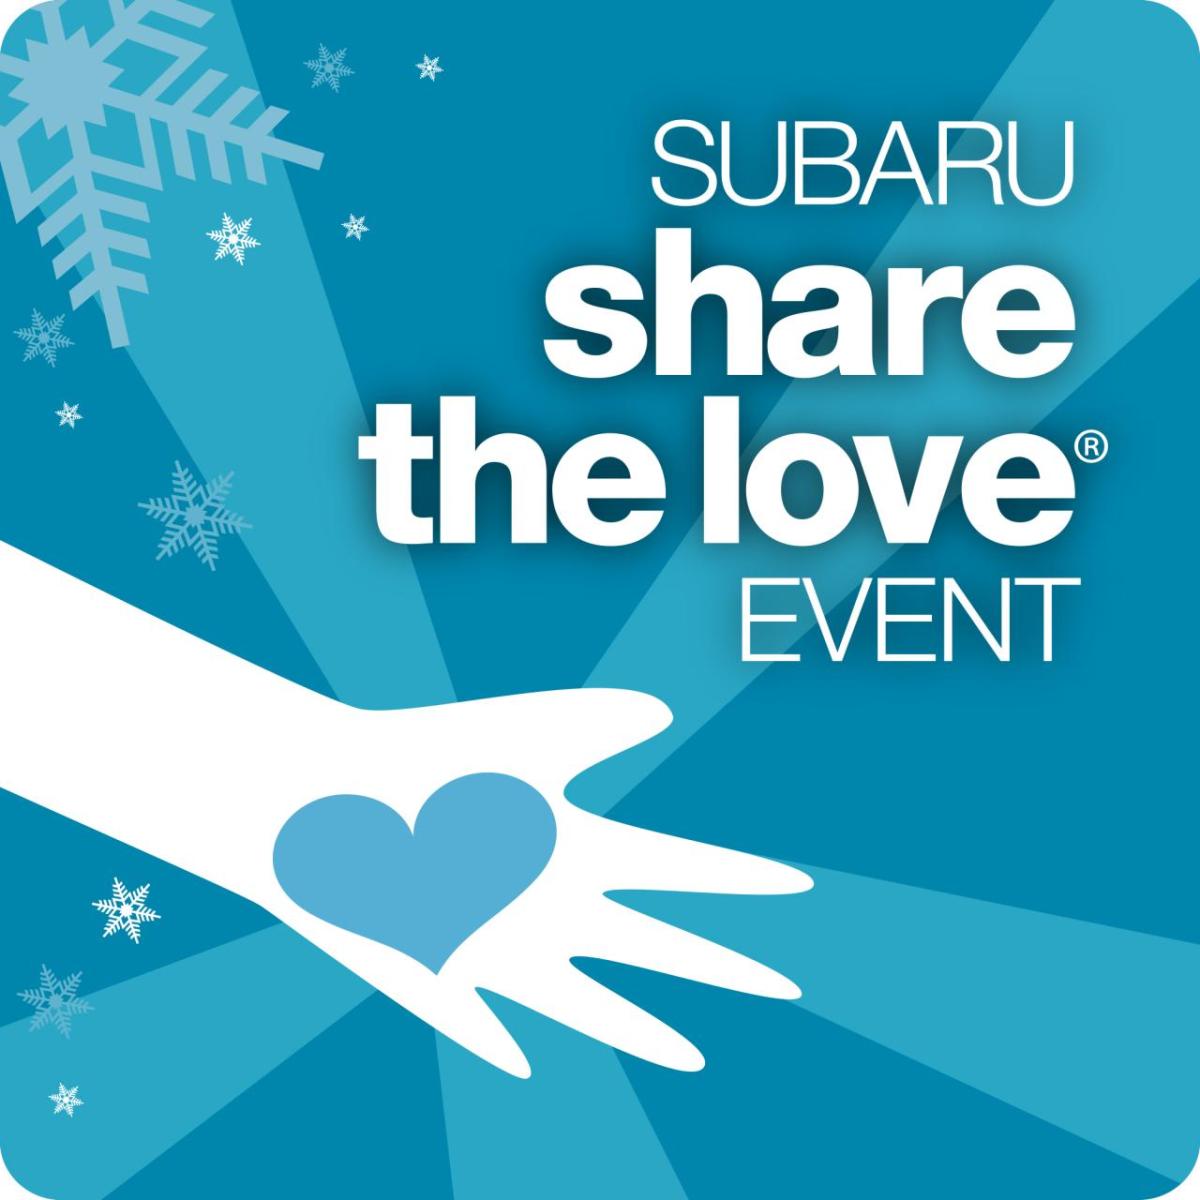 SUBARU share the love event logo, blue black ground with snowflakes and a hand with a blue heart on the the palm 